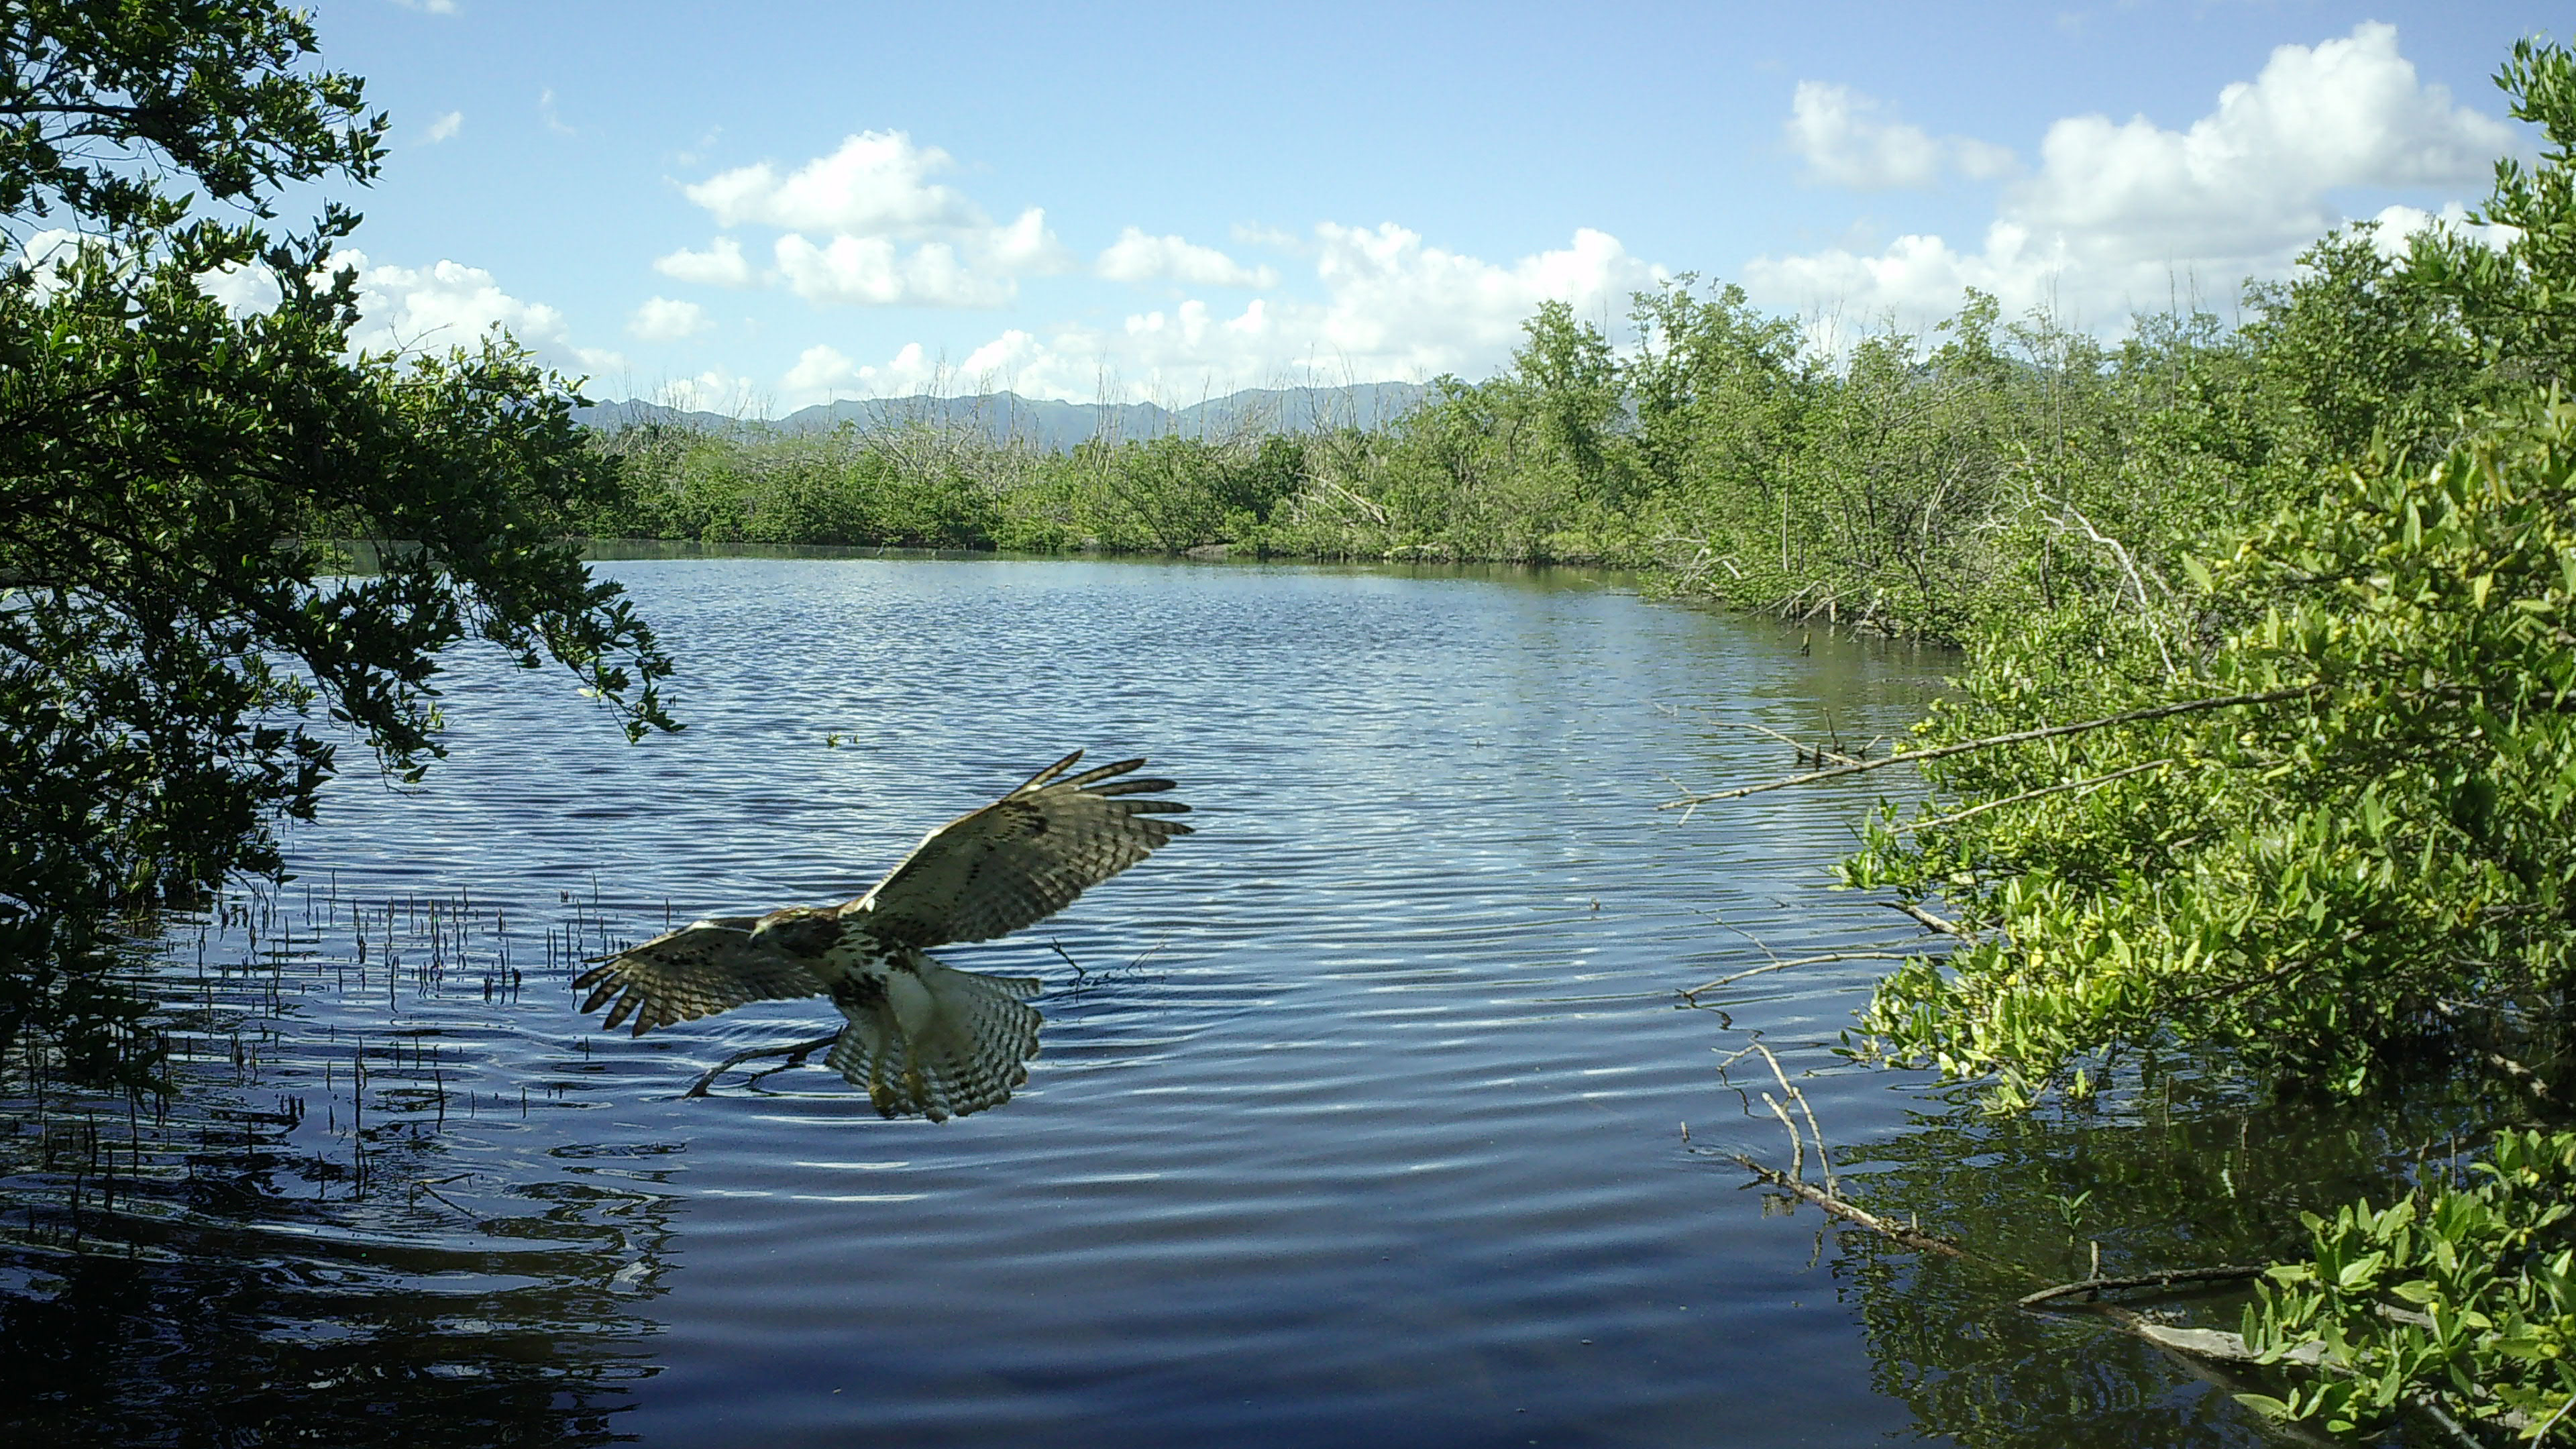 A brown- and white-speckled bird, with wings and tail feathers spread wide, appears to be coming in for a landing mere feet above a body of water surrounded by low mangroves and brush. A mountain range is visible in the distant background.